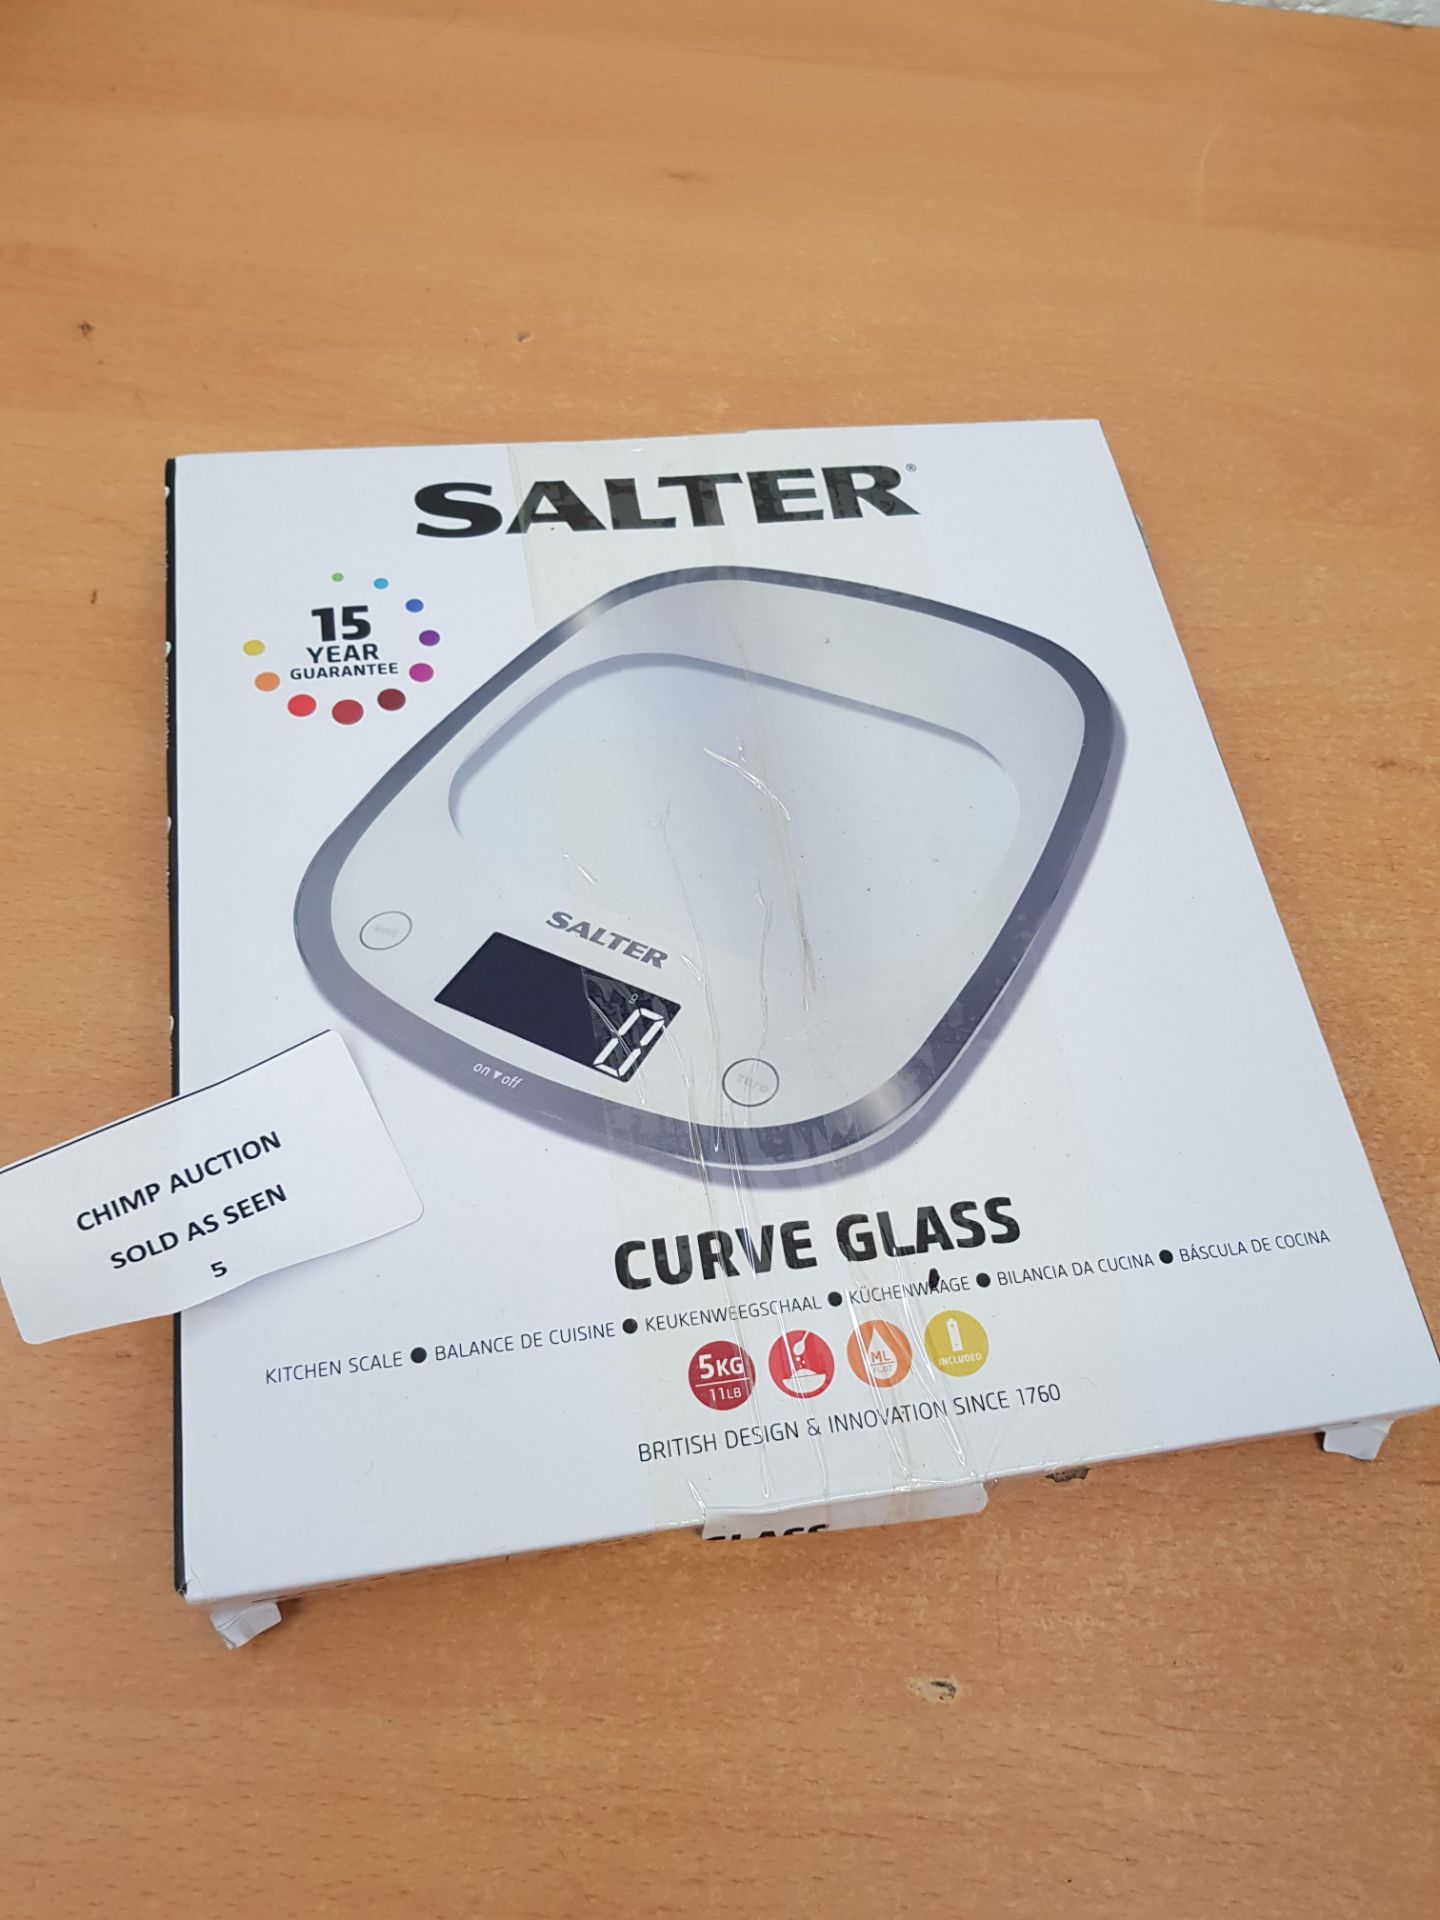 Salter Curve Glass Kitchen Scale